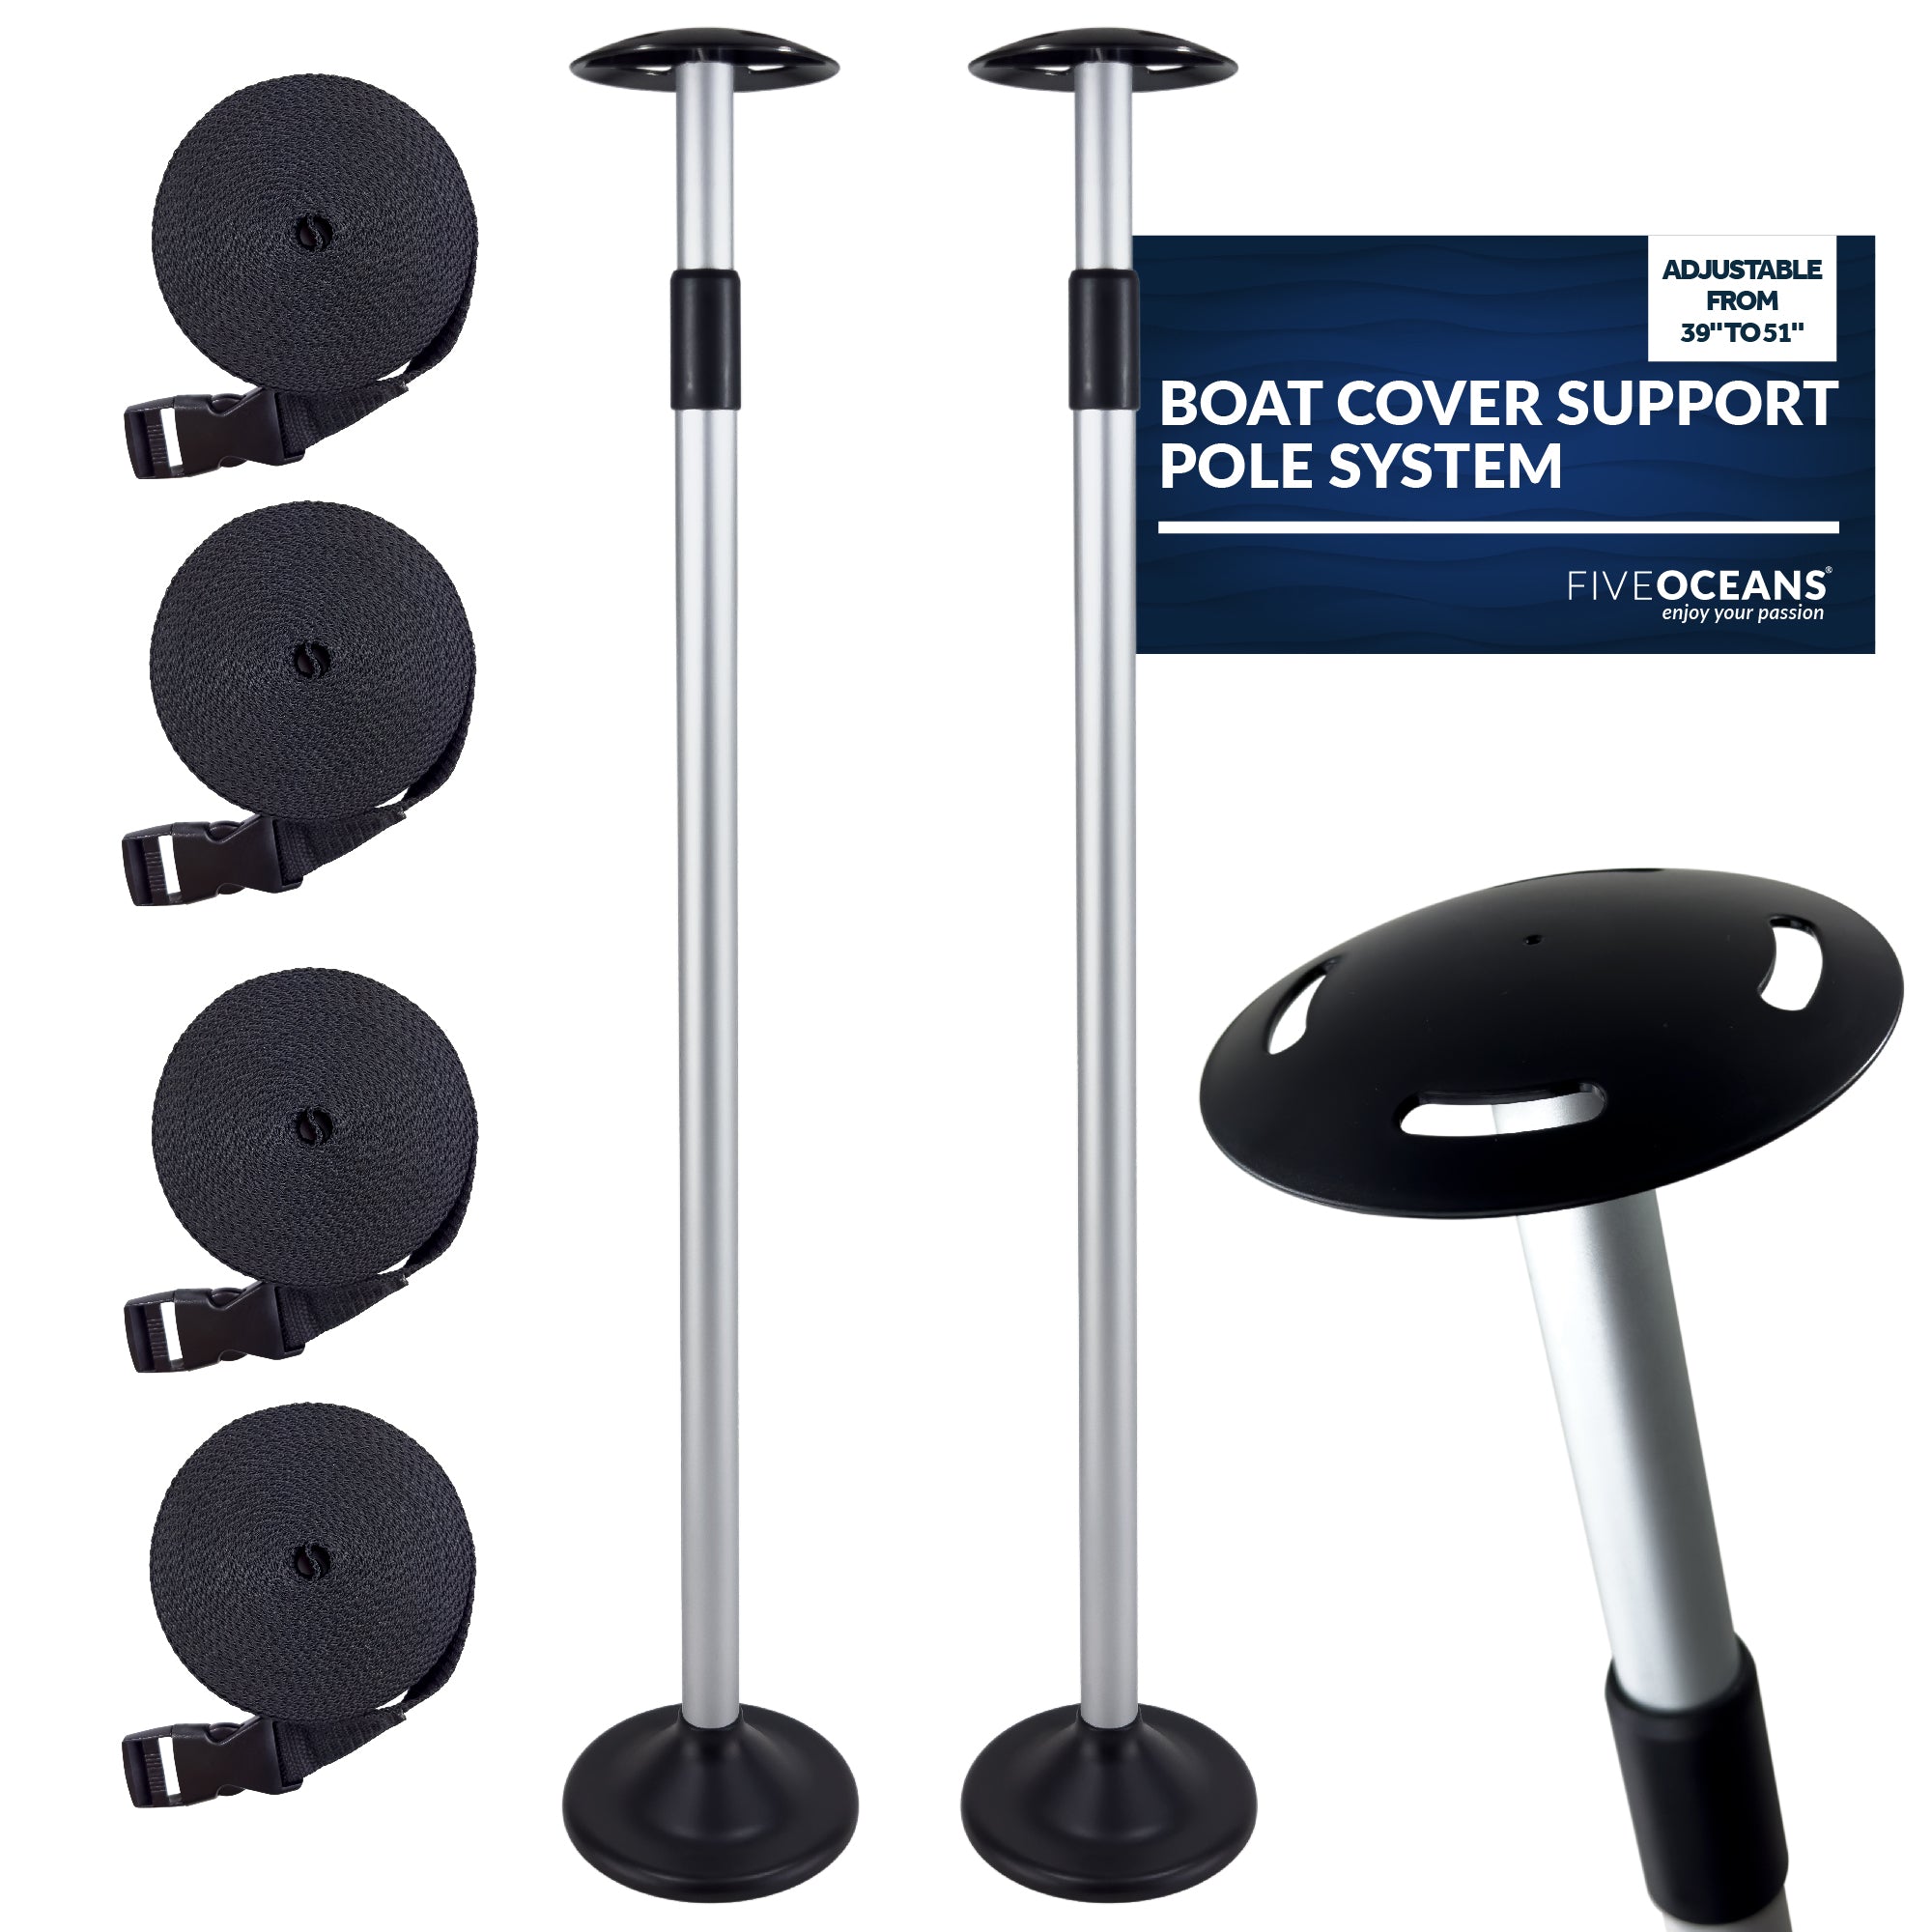 Boat Cover Support Pole System, Adjustable from 39" to 51", 2-Pack - FO4688-M2